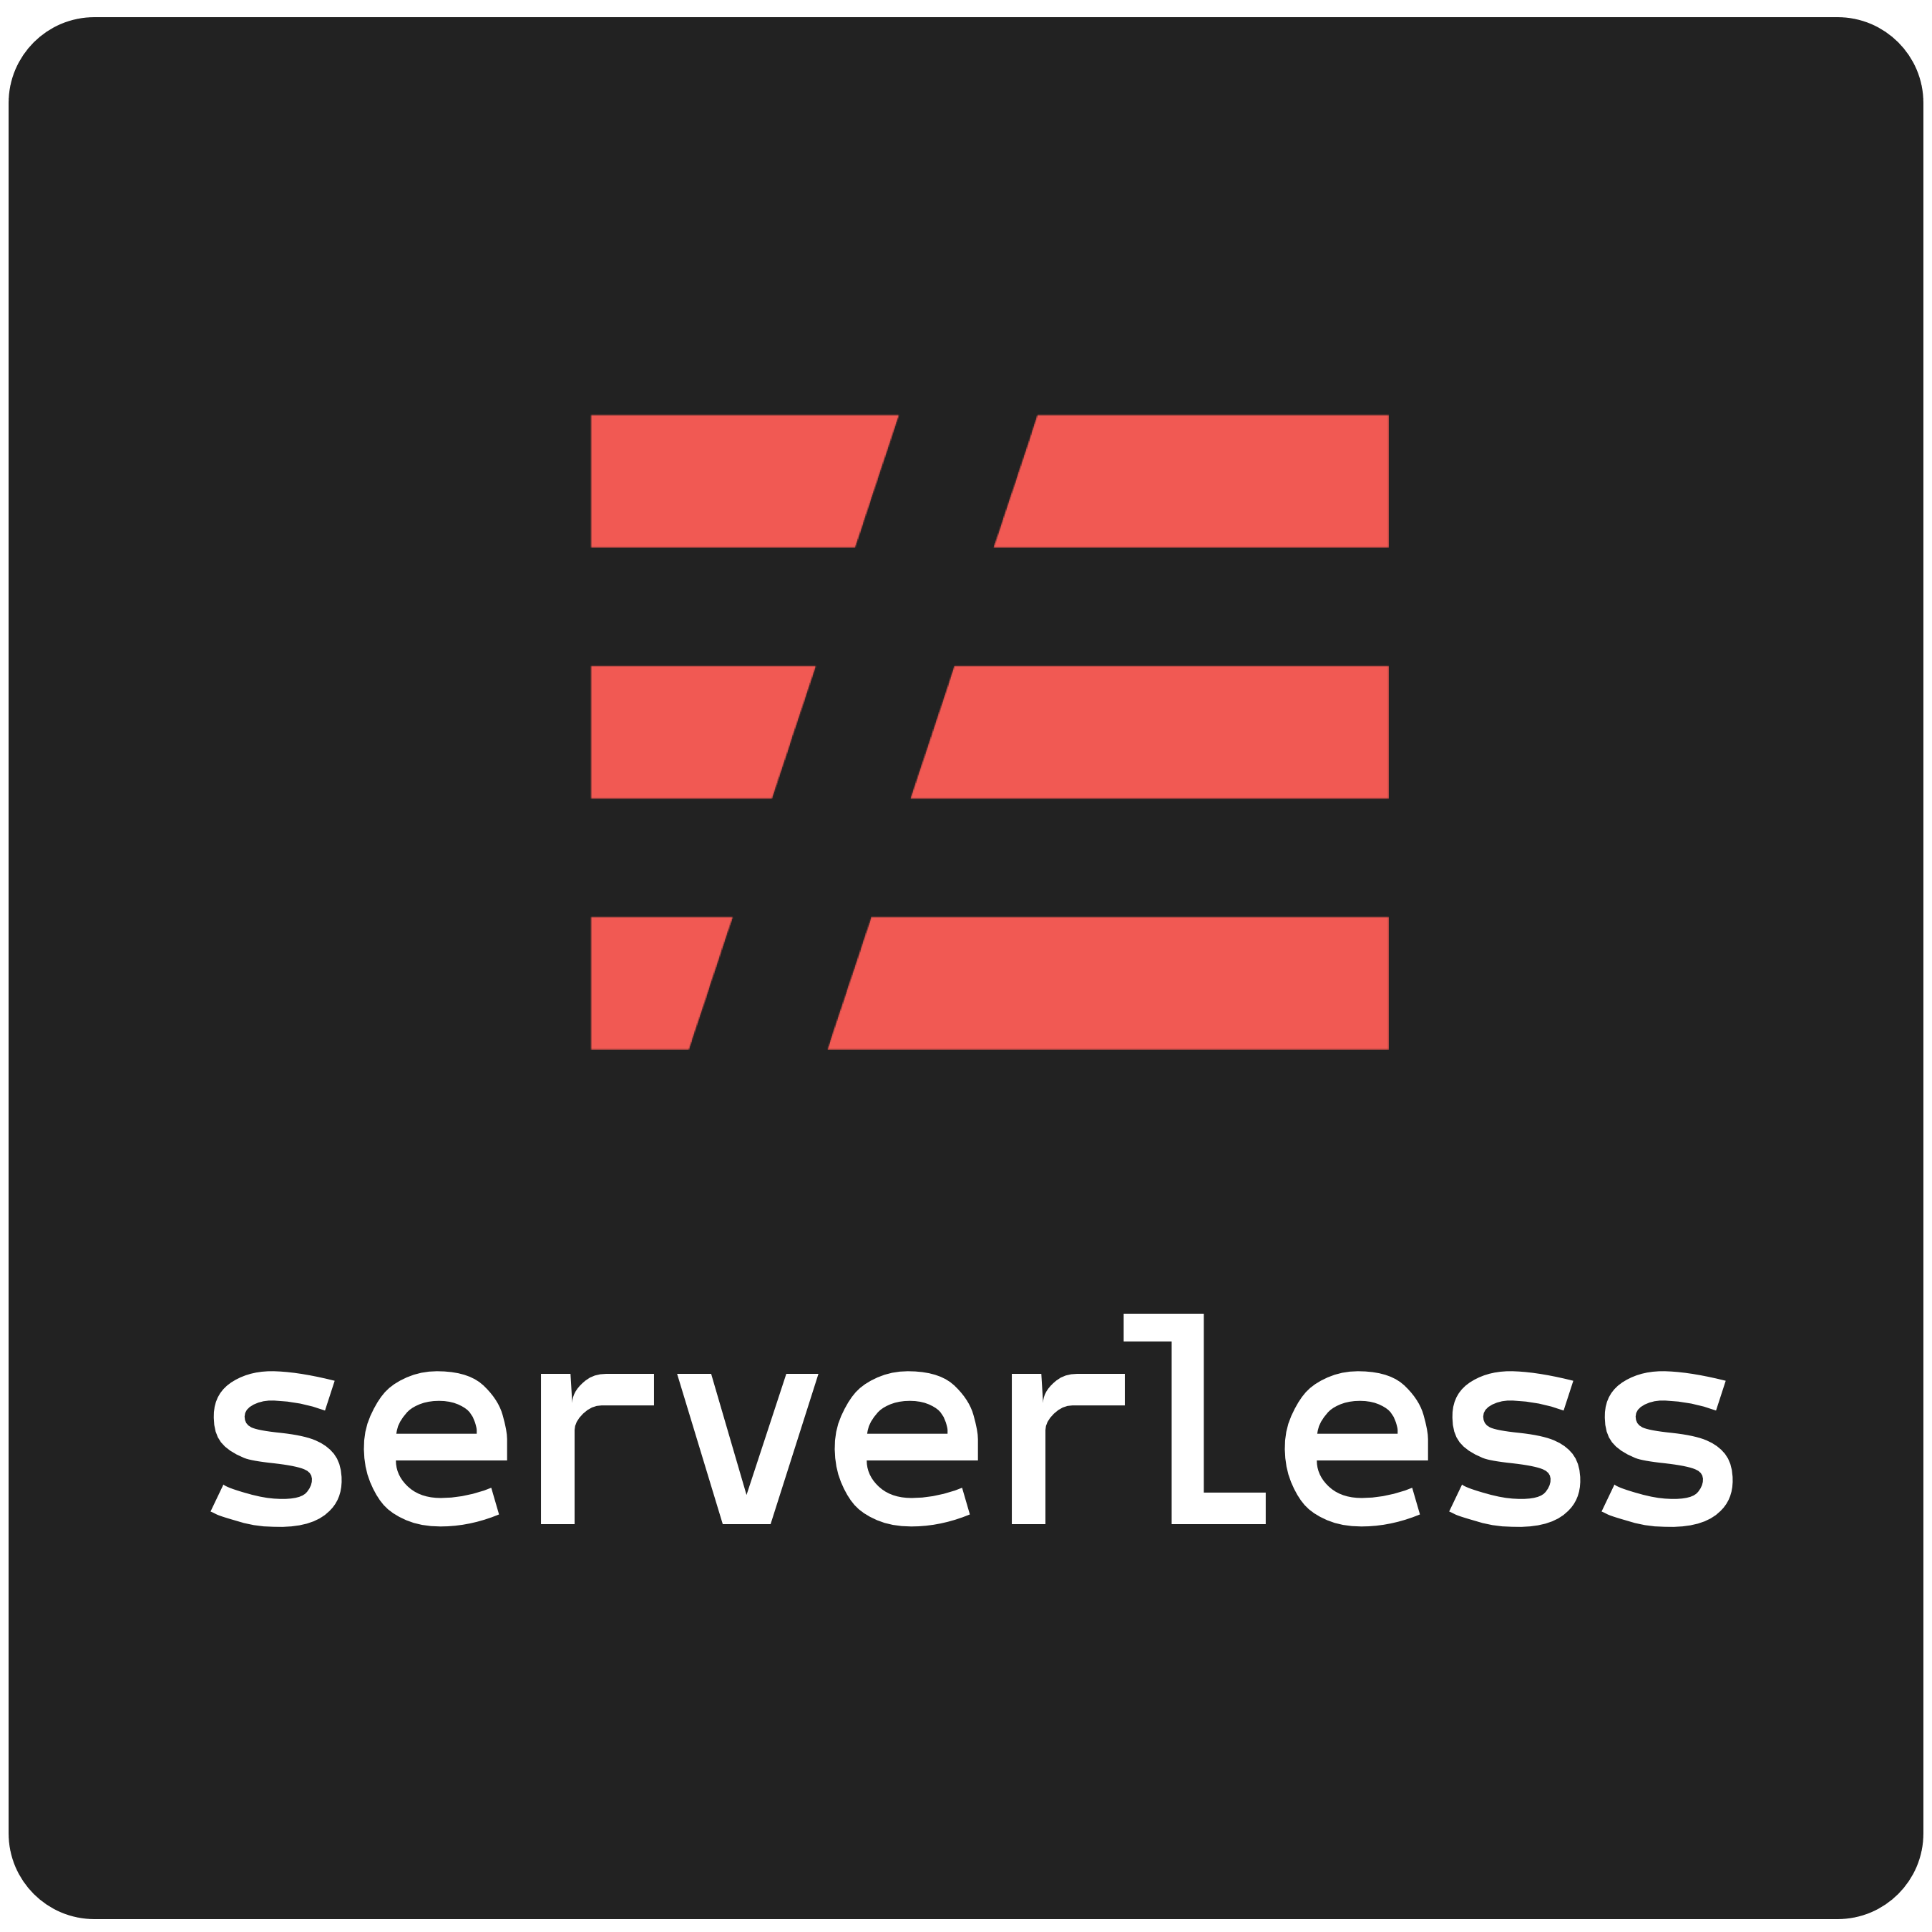 Why small companies and startups should use serverless architecture